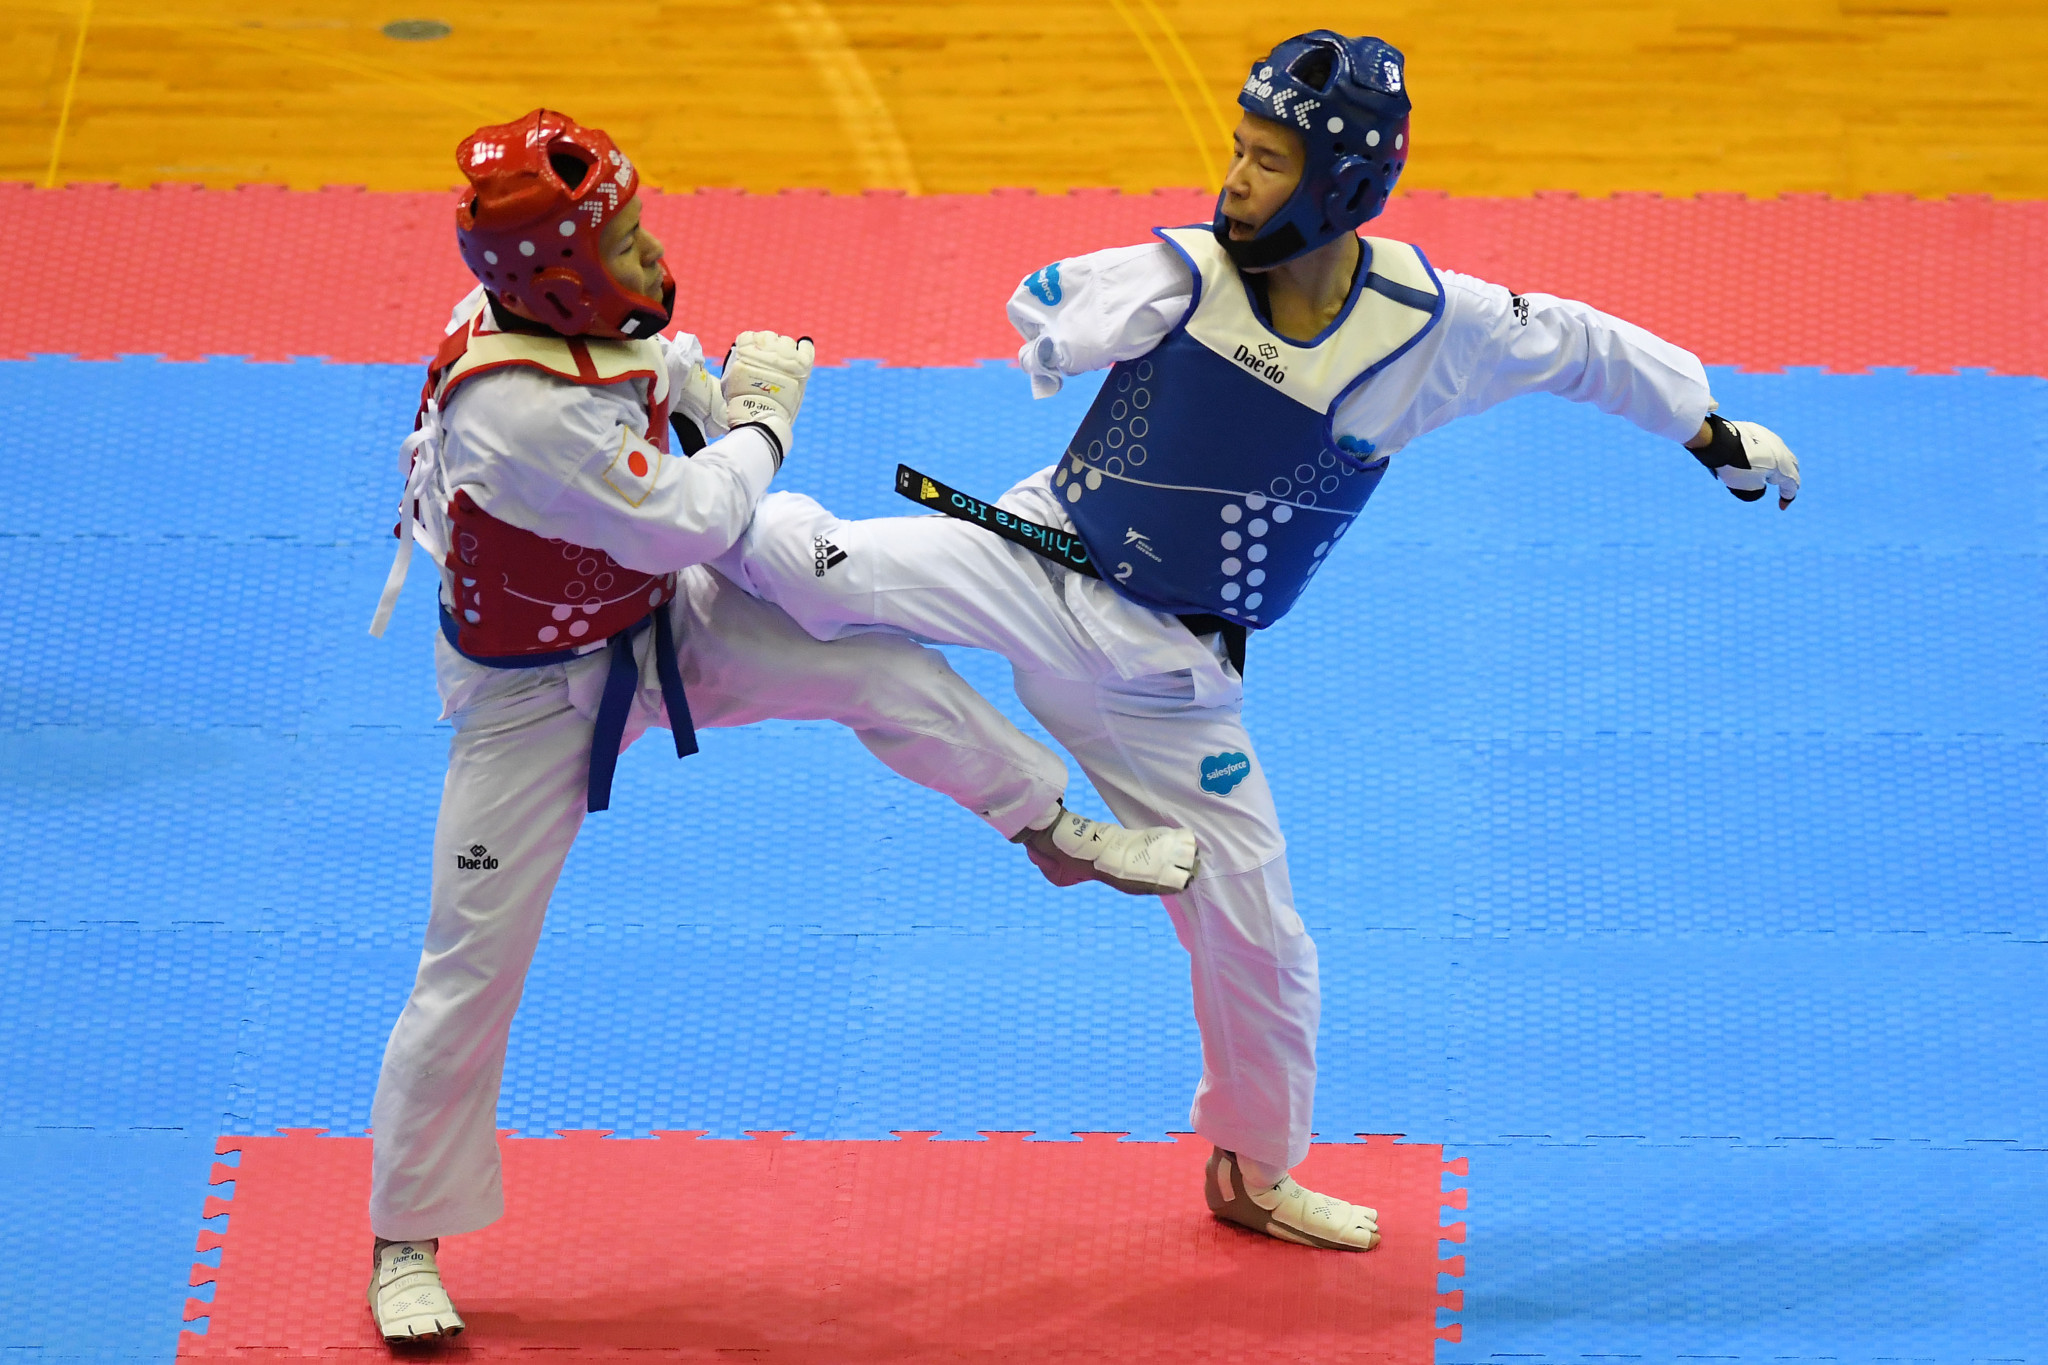 World Taekwondo believes Para-taekwondo has continued to go from strength to strength since it was created 15 years ago ©IPC